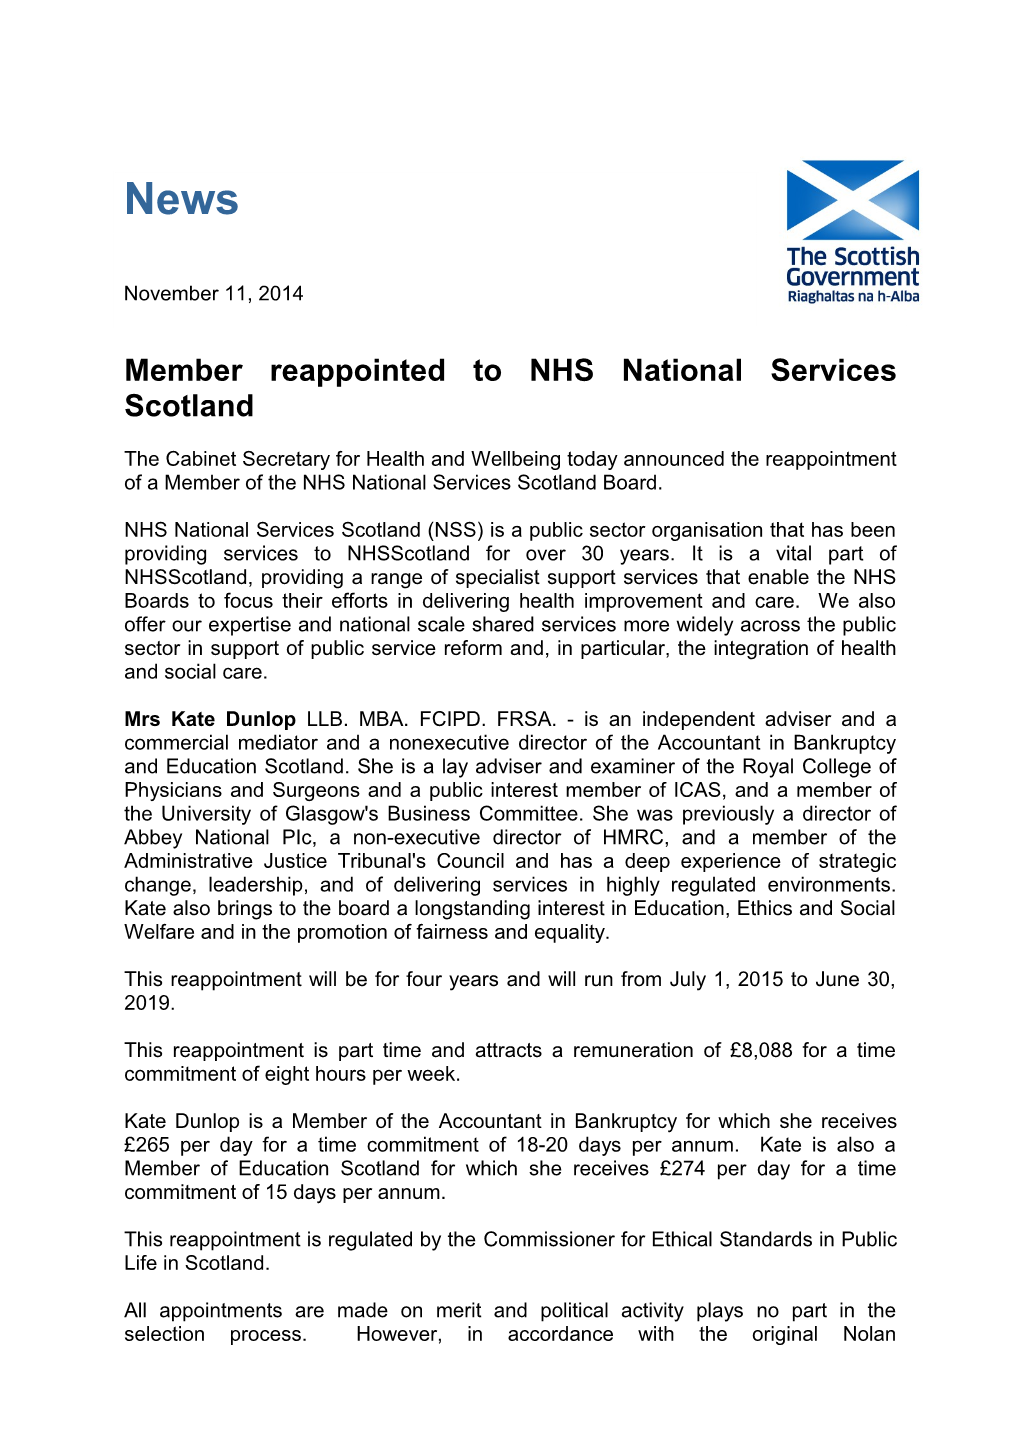 Member Reappointed to NHS National Services Scotland